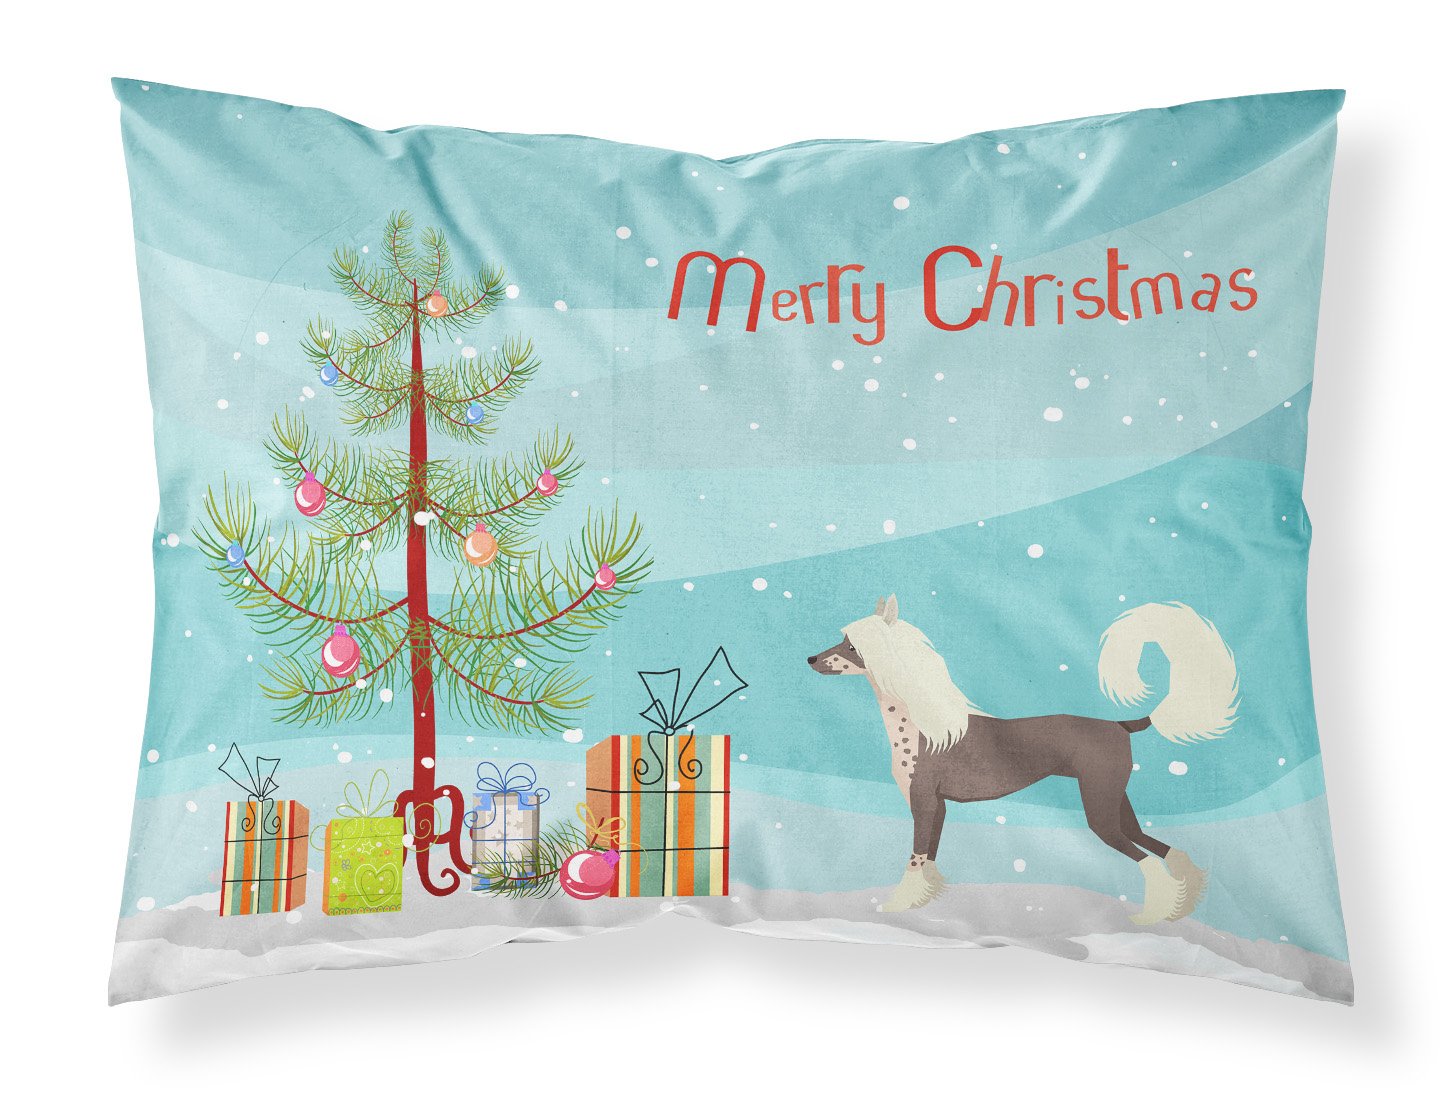 Chinese Crested Christmas Tree Fabric Standard Pillowcase CK3531PILLOWCASE by Caroline's Treasures